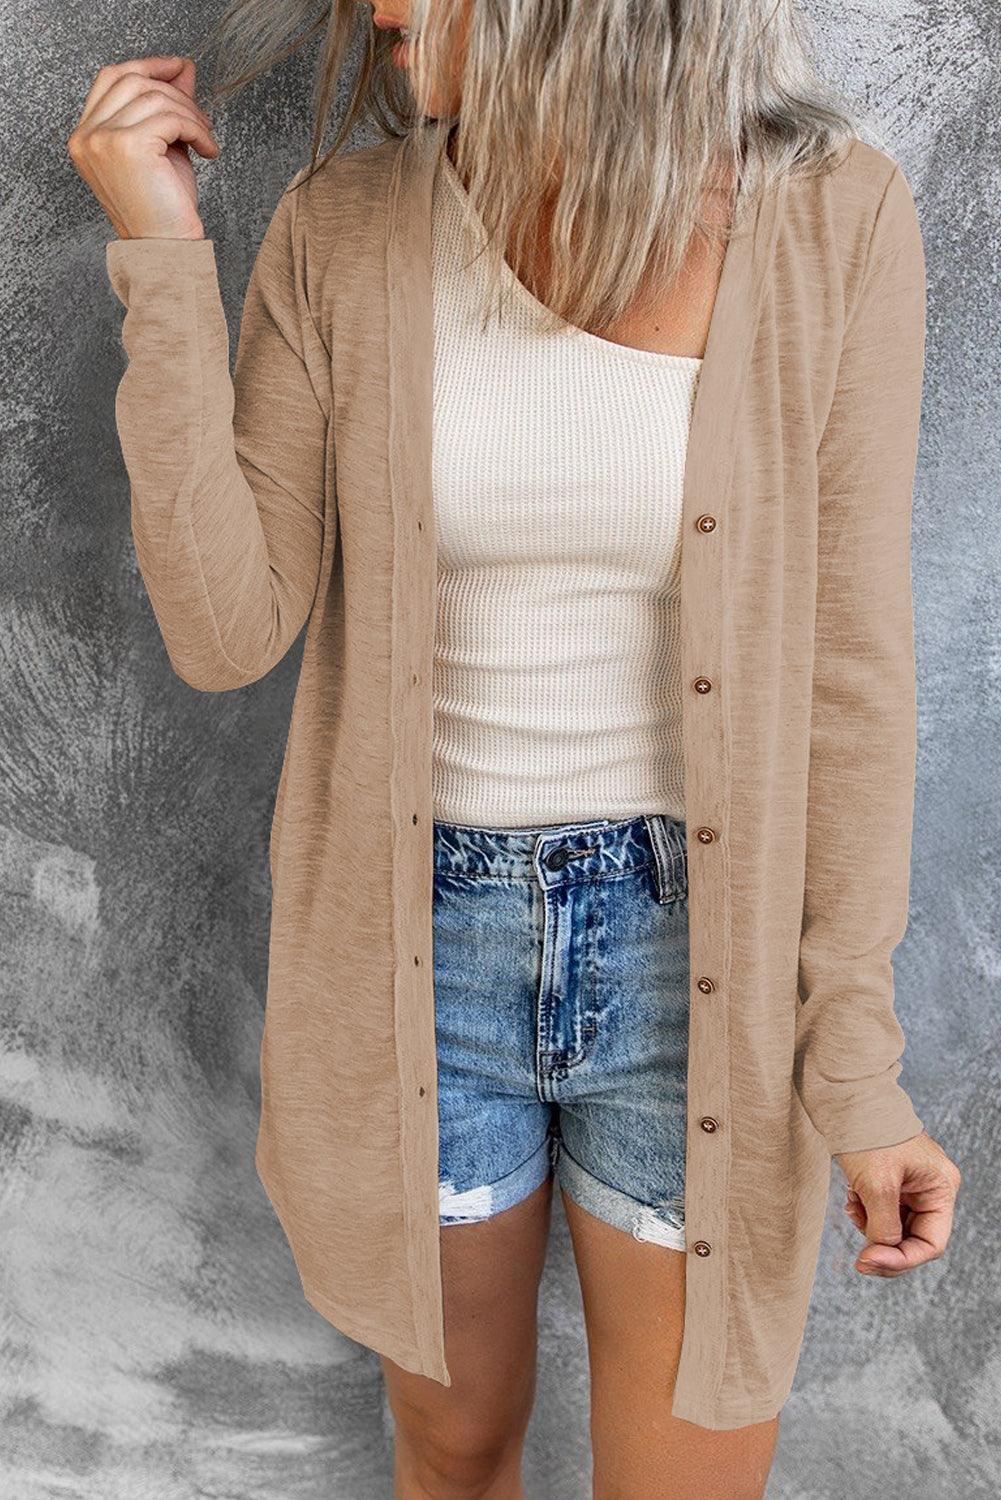 Beige Solid Color Open-Front Buttons Cardigan - L & M Kee, LLC